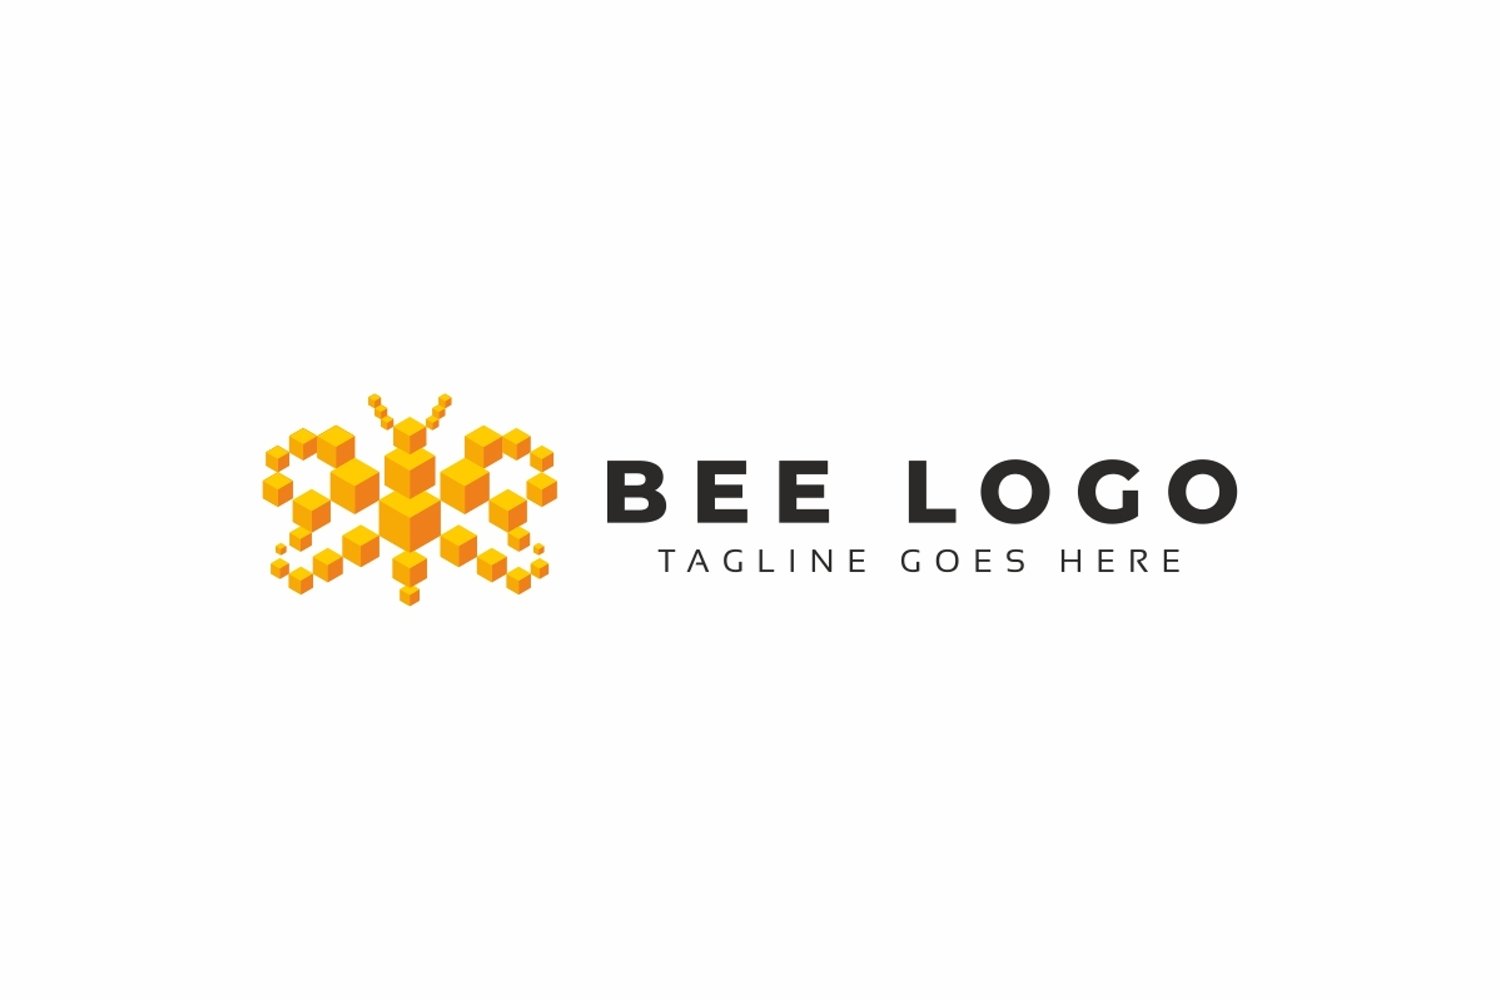 Premium logo perfect for your company.